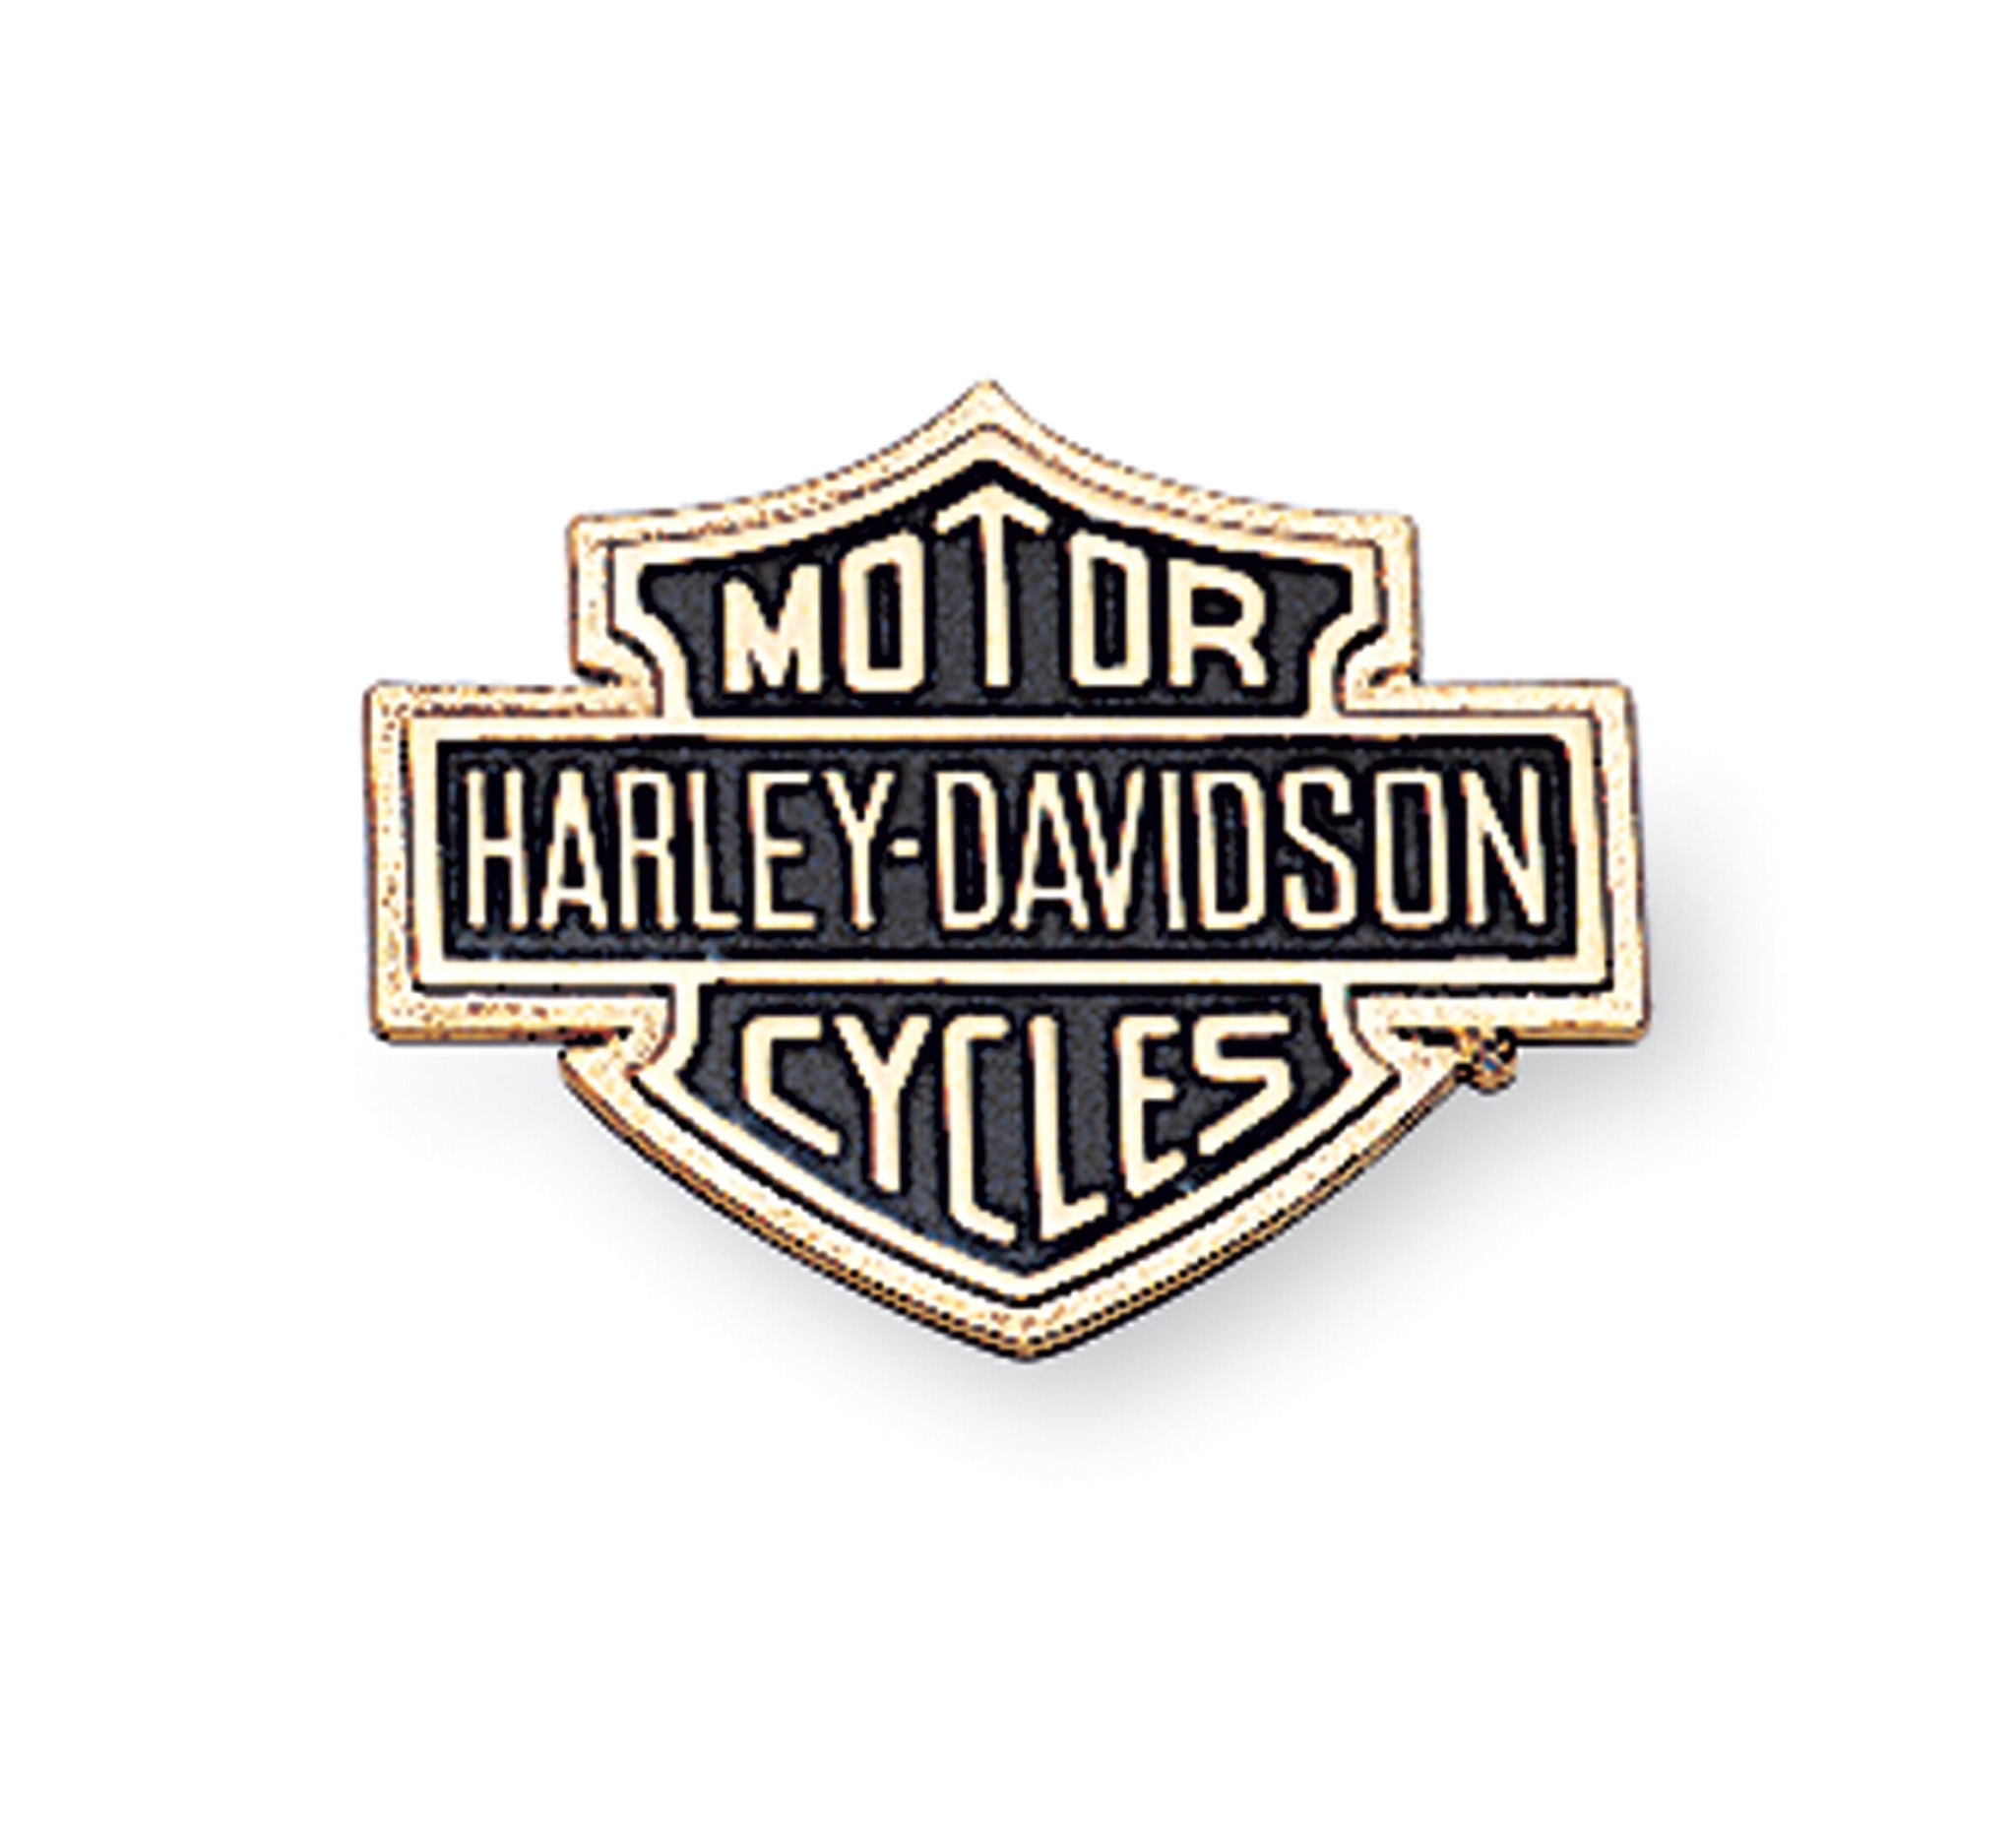 Harley Davidson Offical Dealer 1997 Window Sticker Stick From The Front-UK SELL 